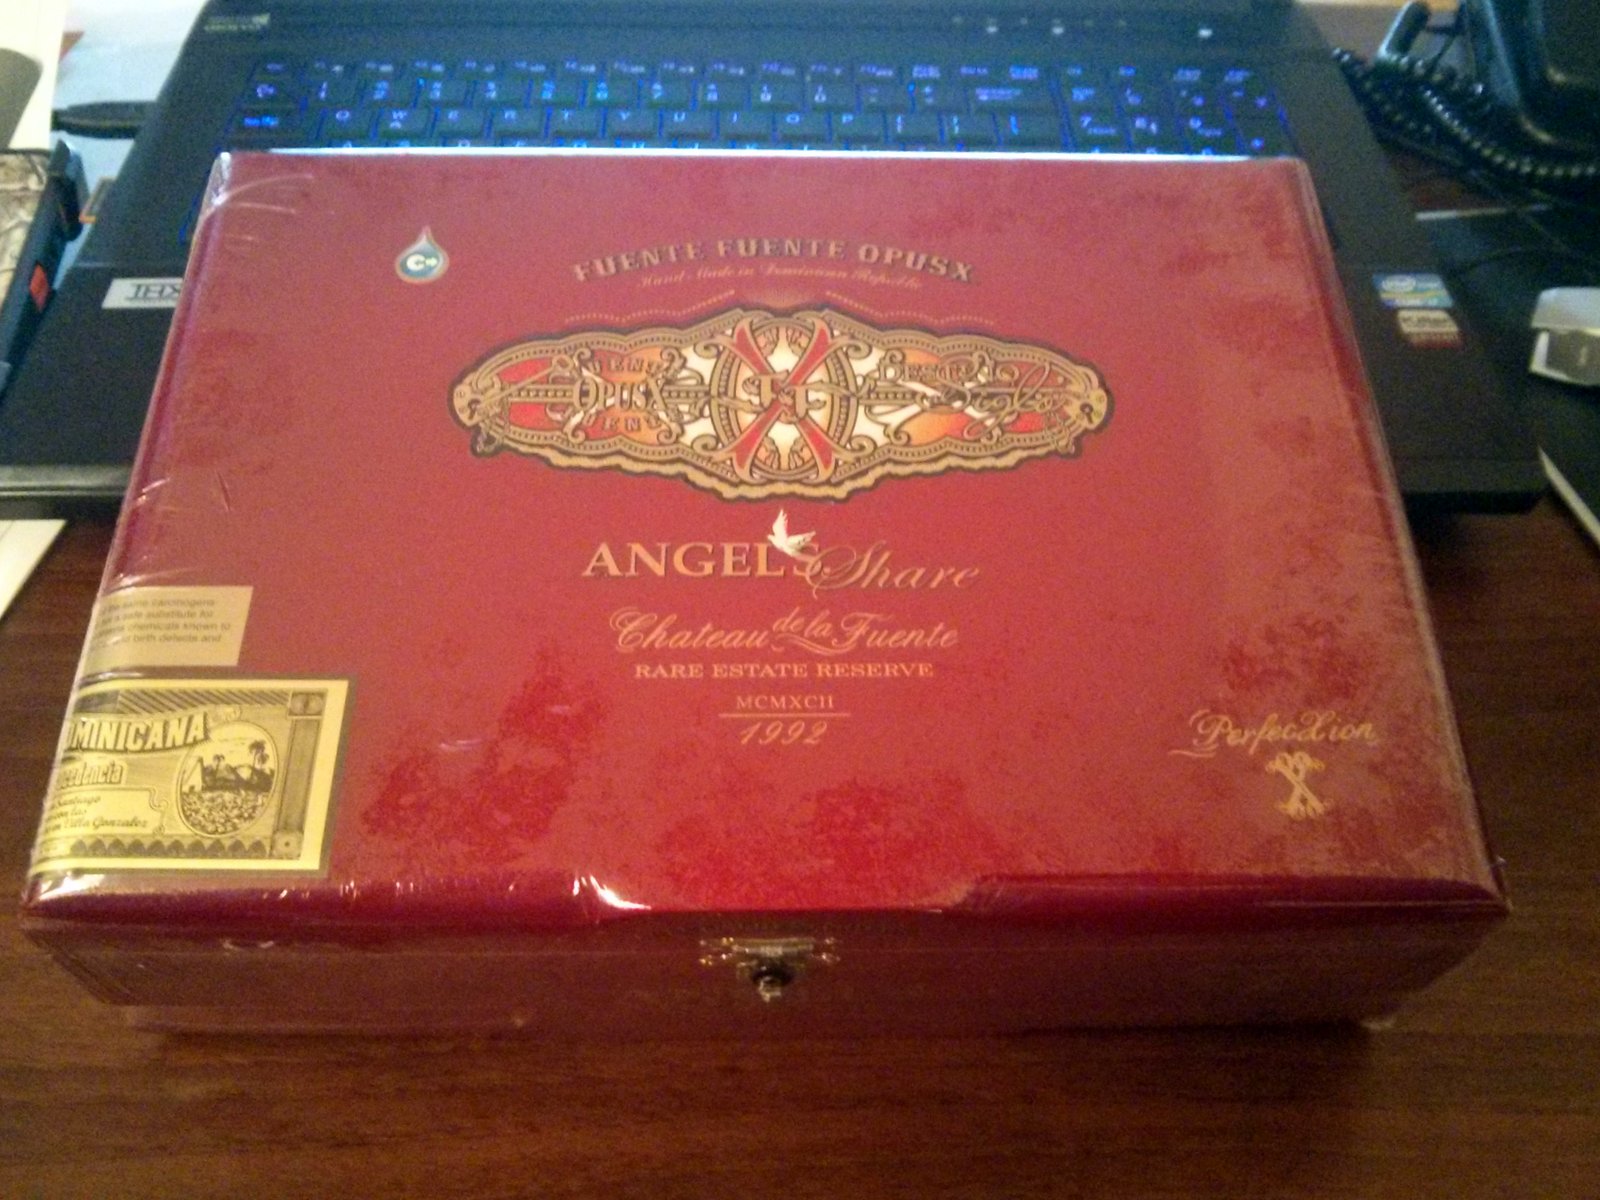 Angel's Share Perfecxion X box in cellophane